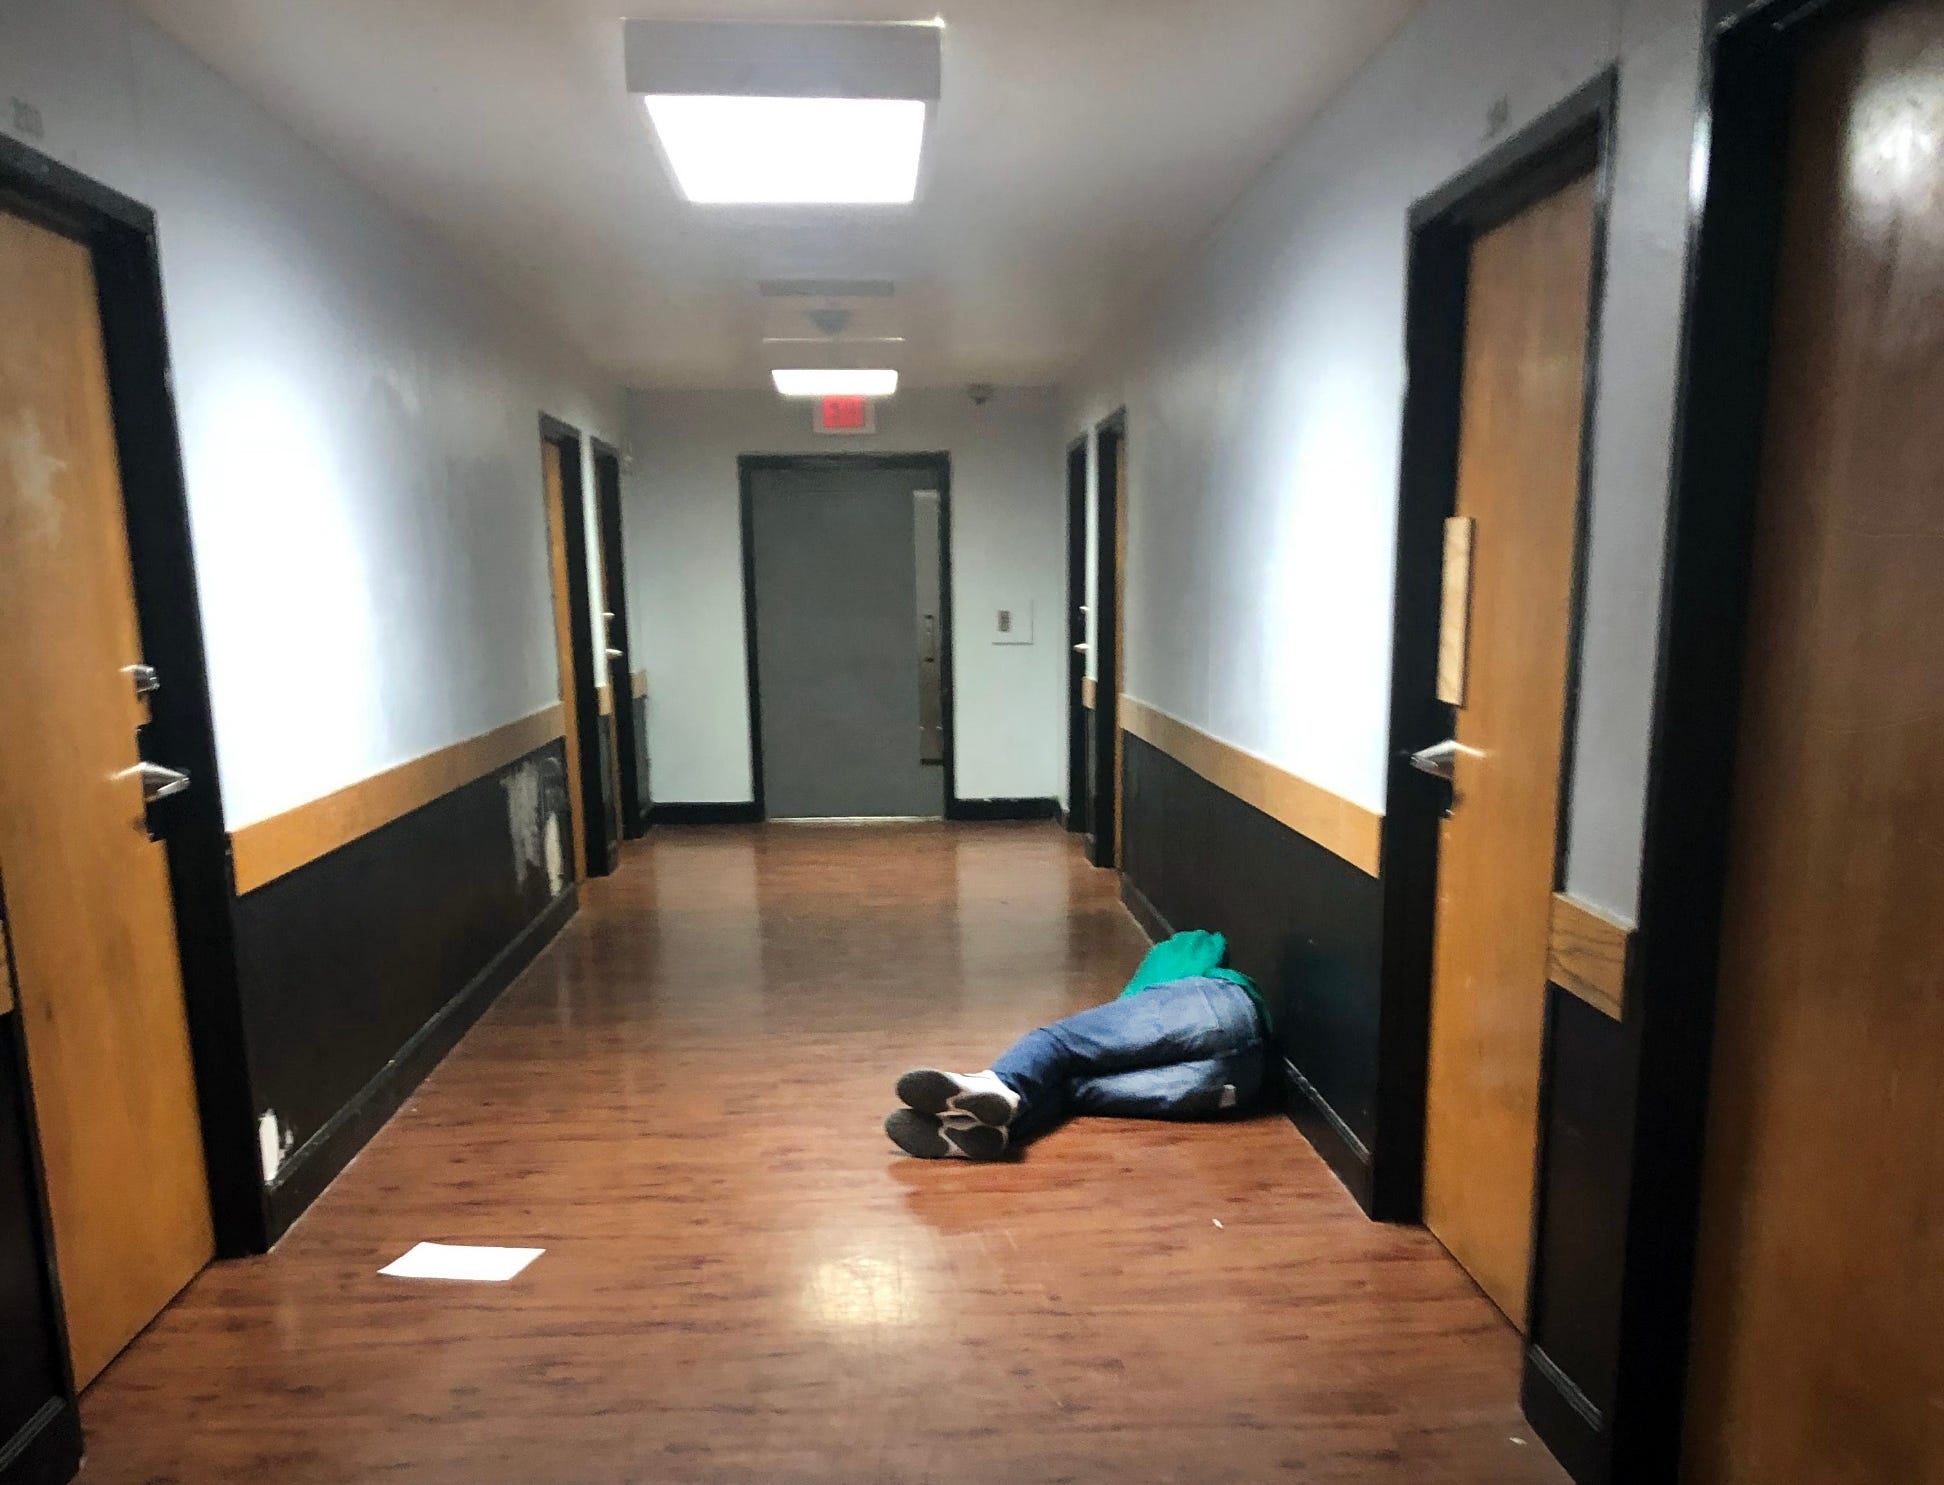 An adult visitor shared photos of a locked facility in Arkansas where the state of North Carolina sends children who need mental health care — or who don't, but lack a foster care placement bed. In this Piney Ridge center, the children's rooms are reportedly locked during the day and they sometimes lie on the floor in the halls.